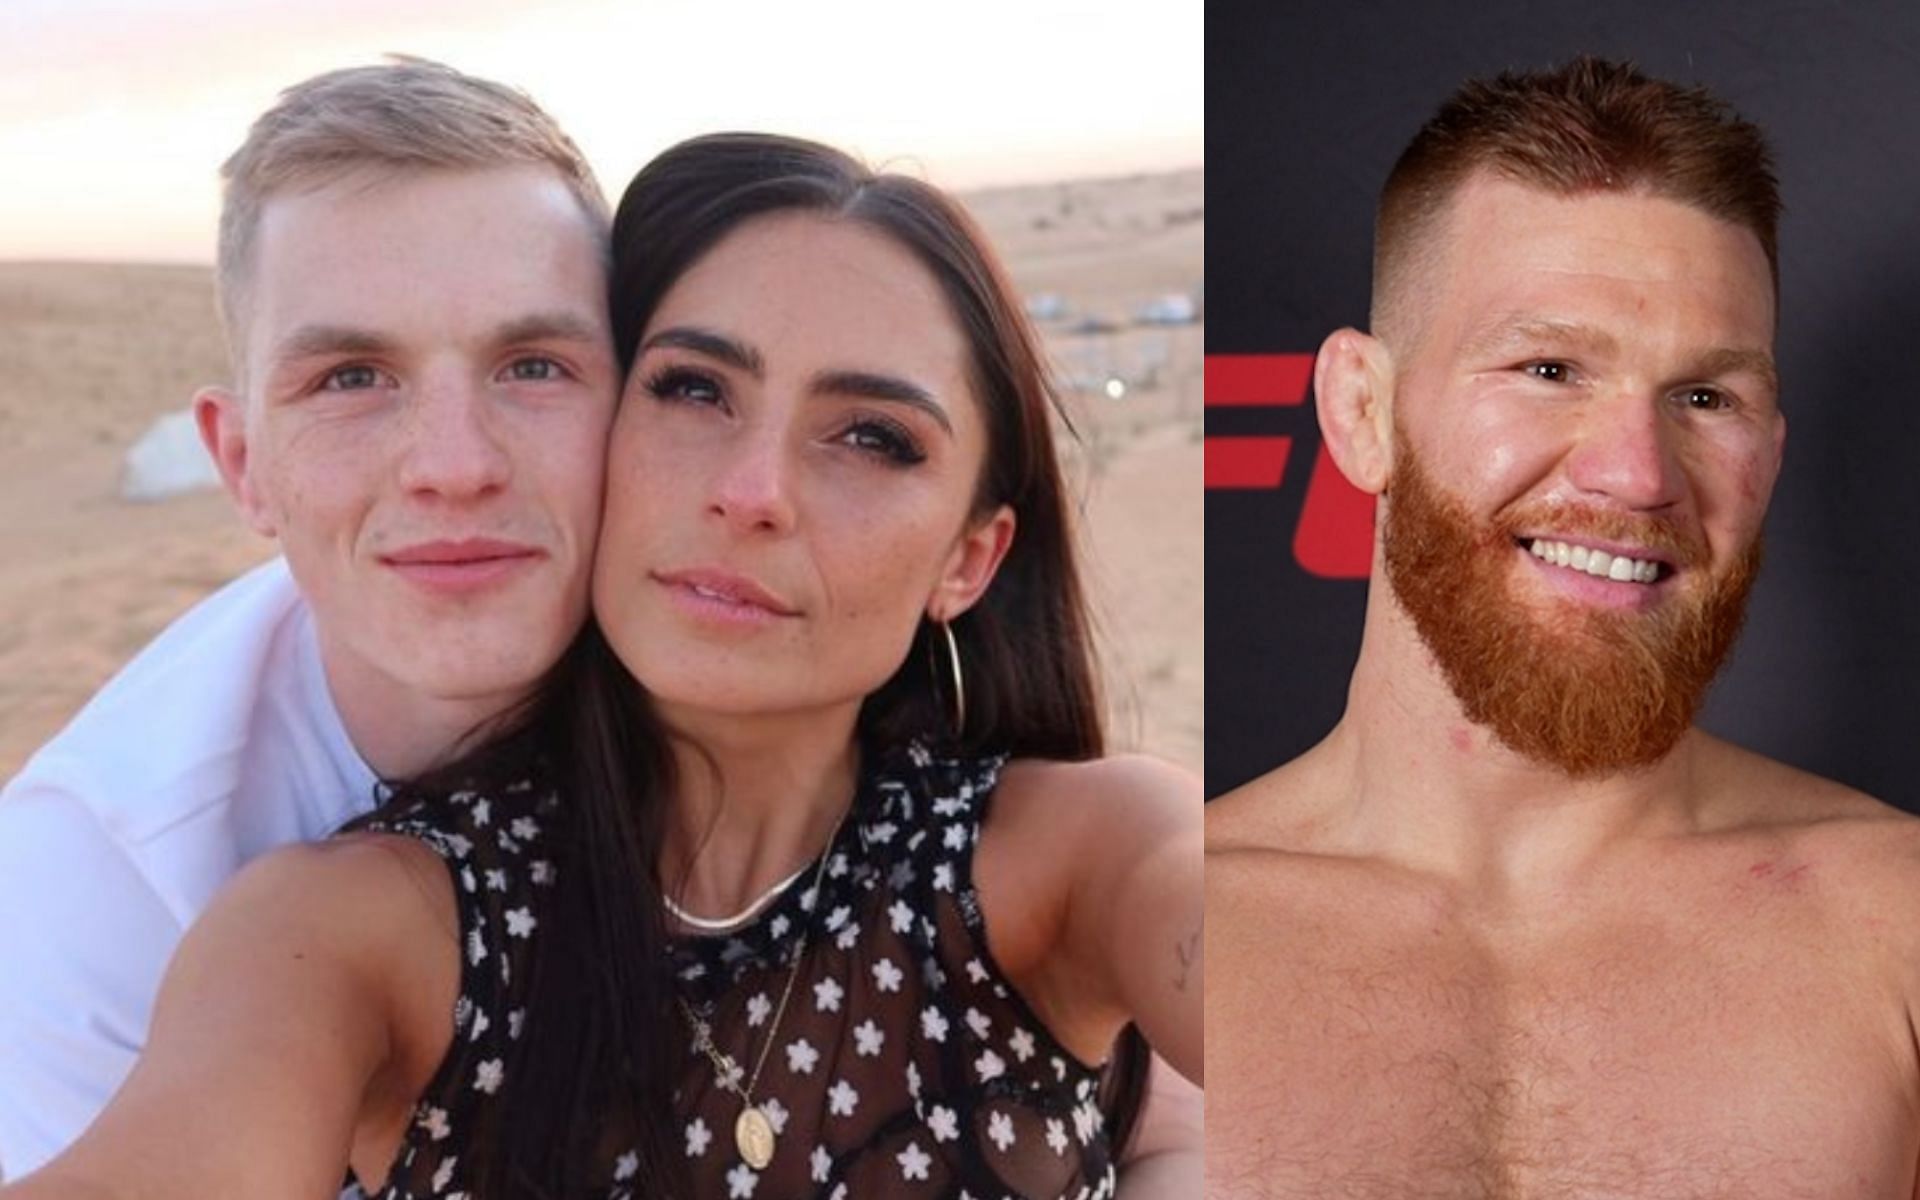 Ian Garry and Layla Anna-Lee (left) and Matt Frevola (right). [via Instagram @laylannalee and UFC]